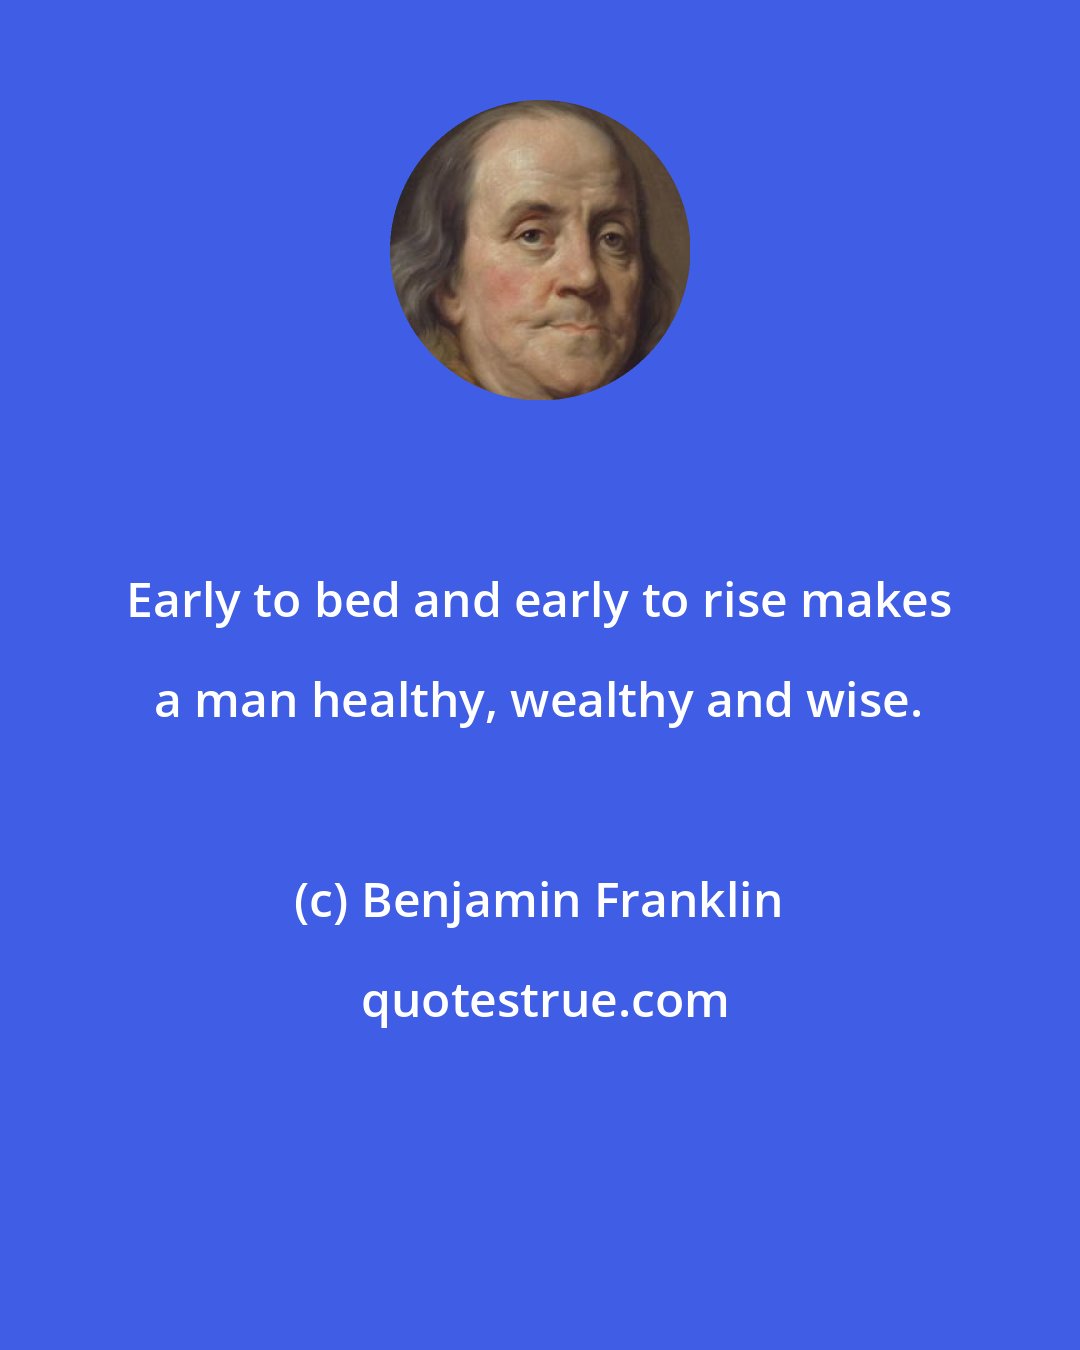 Benjamin Franklin: Early to bed and early to rise makes a man healthy, wealthy and wise.